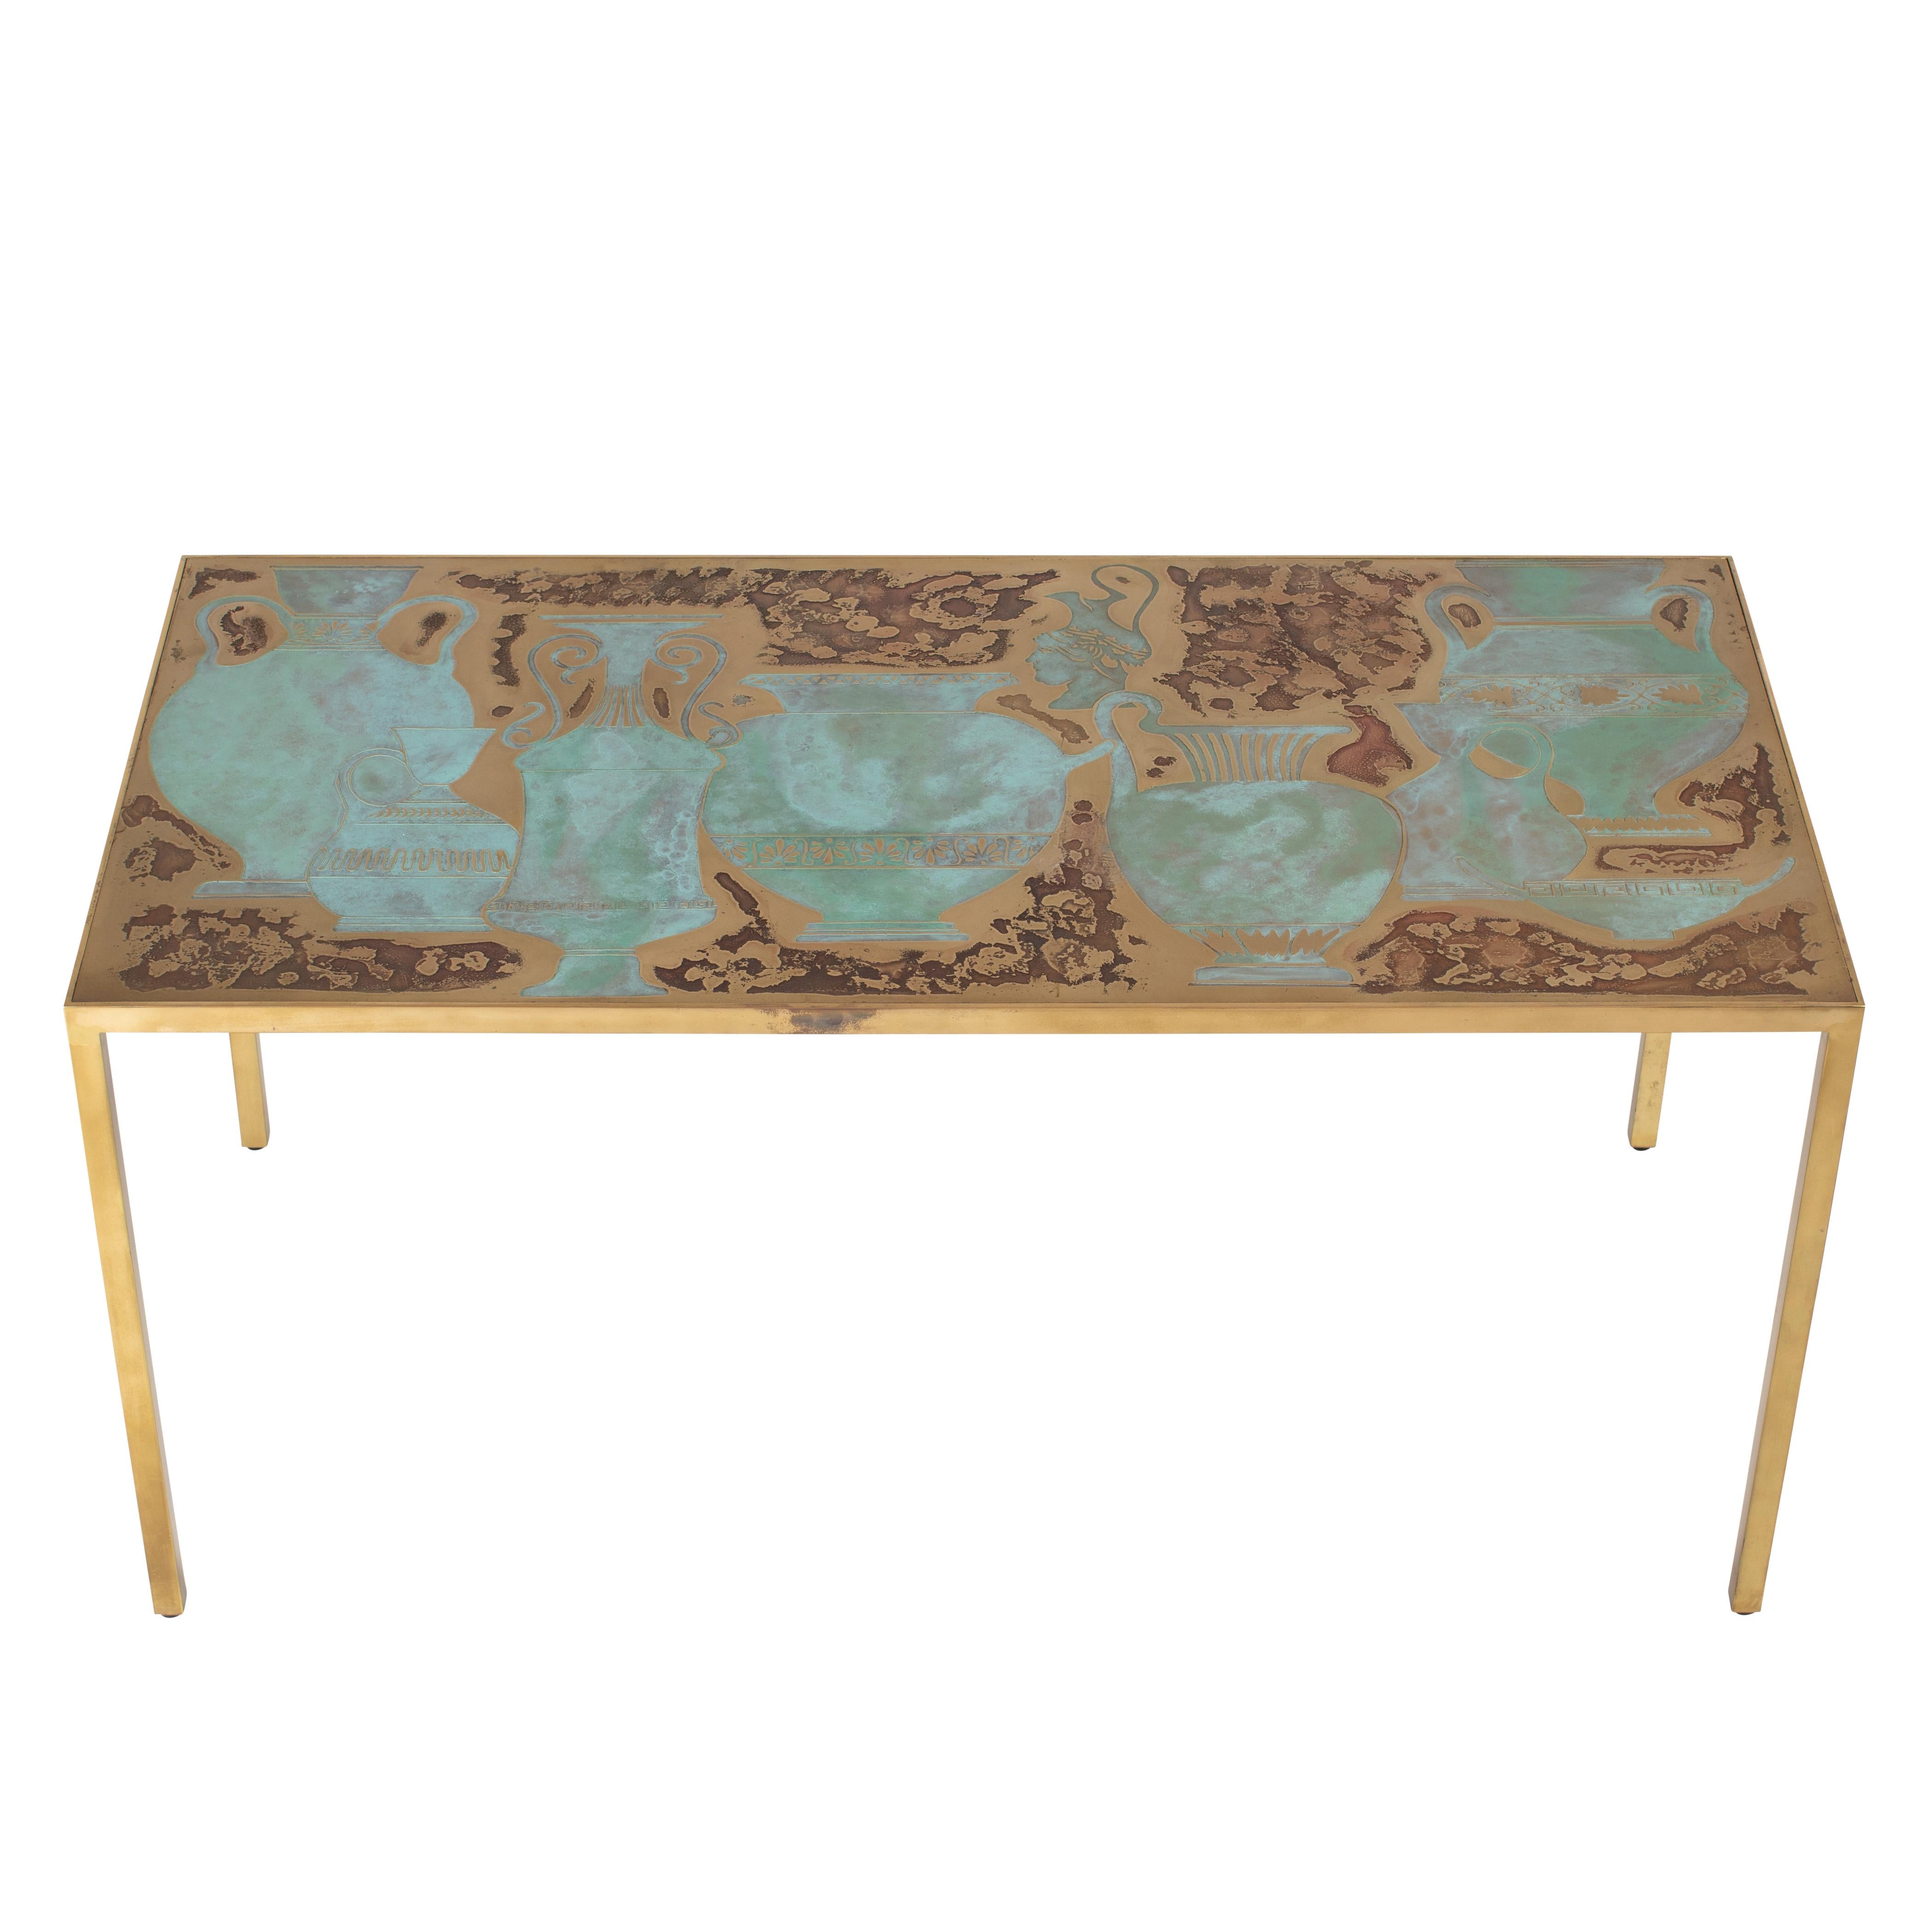 Rare Harvey Probber Acid-Etched and Patinated Bronze Sofa Table, circa 1960s